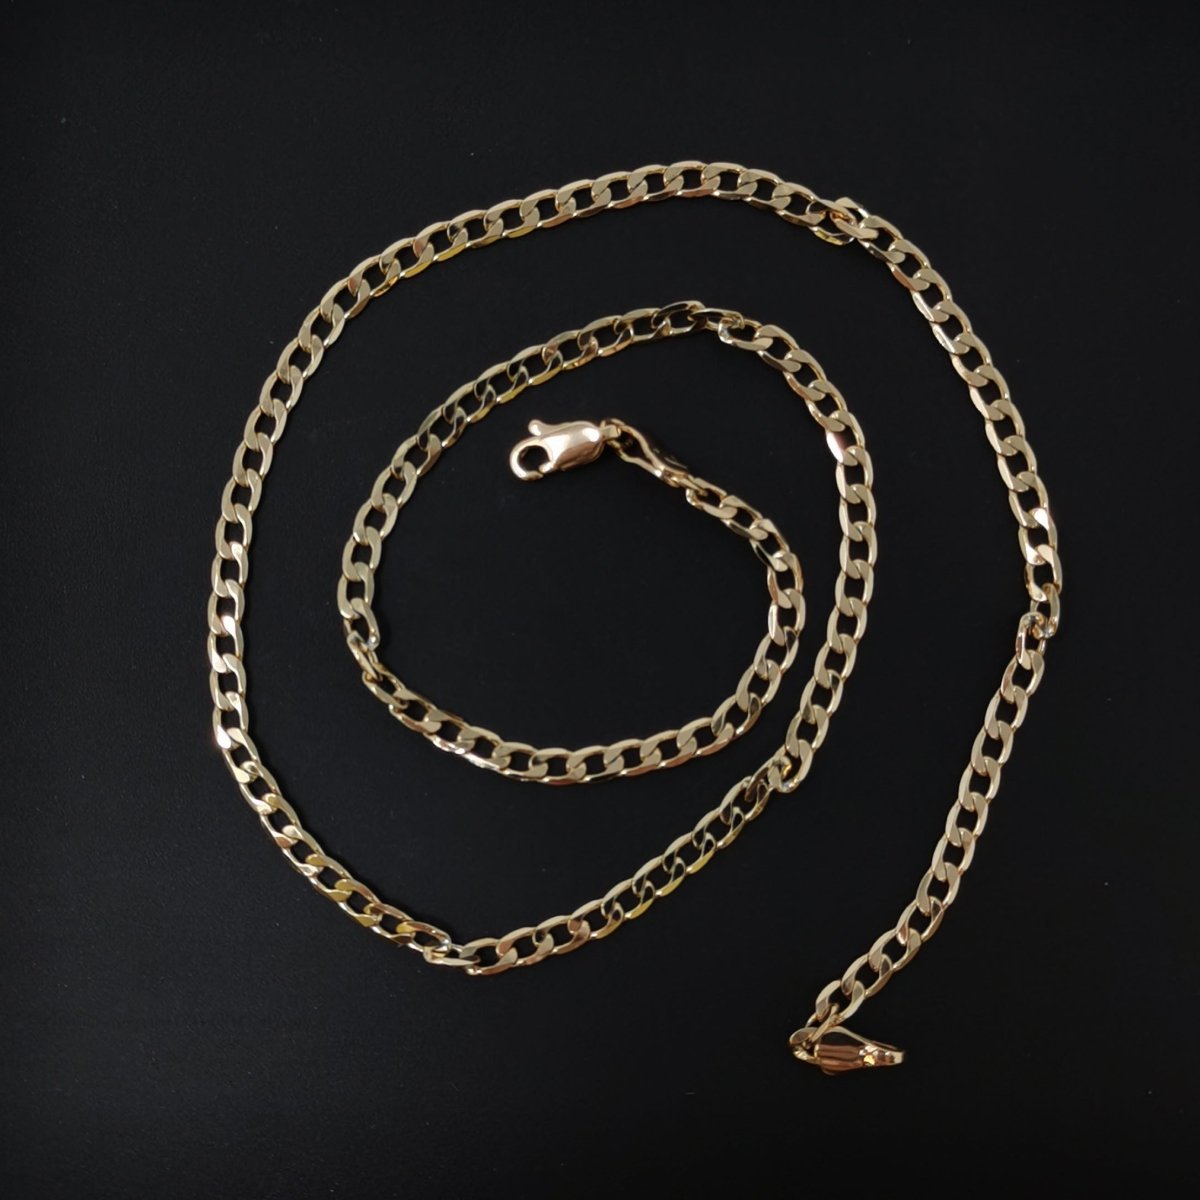 18K Gold Filled Curb Chain Necklace, 17.7 Inches Curb Finished Necklace For Jewelry Making, Dainty 1mm Curb Necklace w/ Lobster Clasps | CN-679 Clearance Pricing - DLUXCA